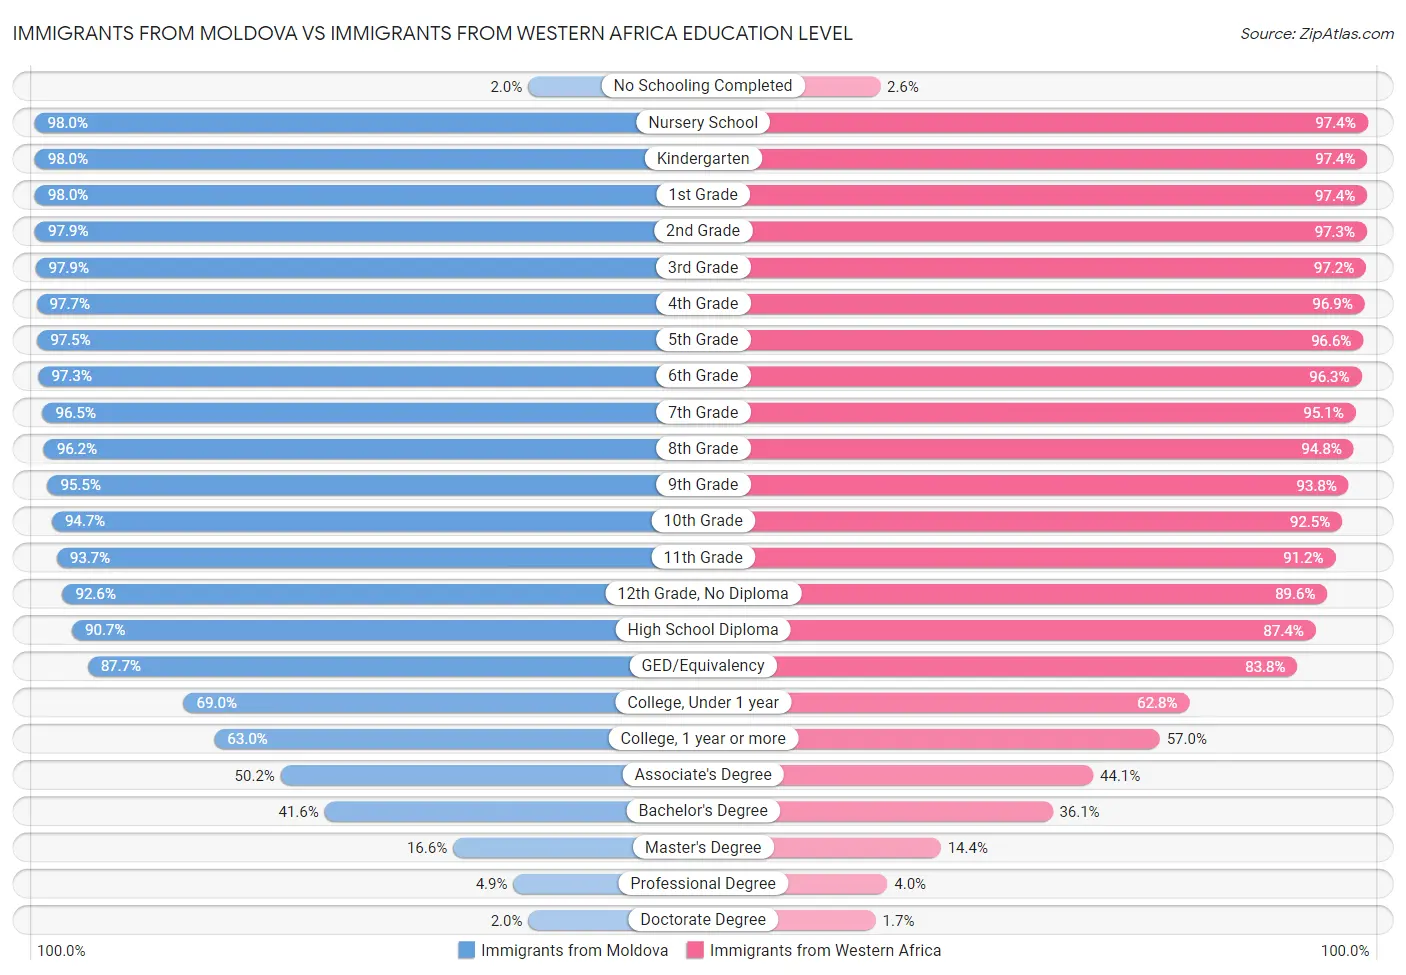 Immigrants from Moldova vs Immigrants from Western Africa Education Level